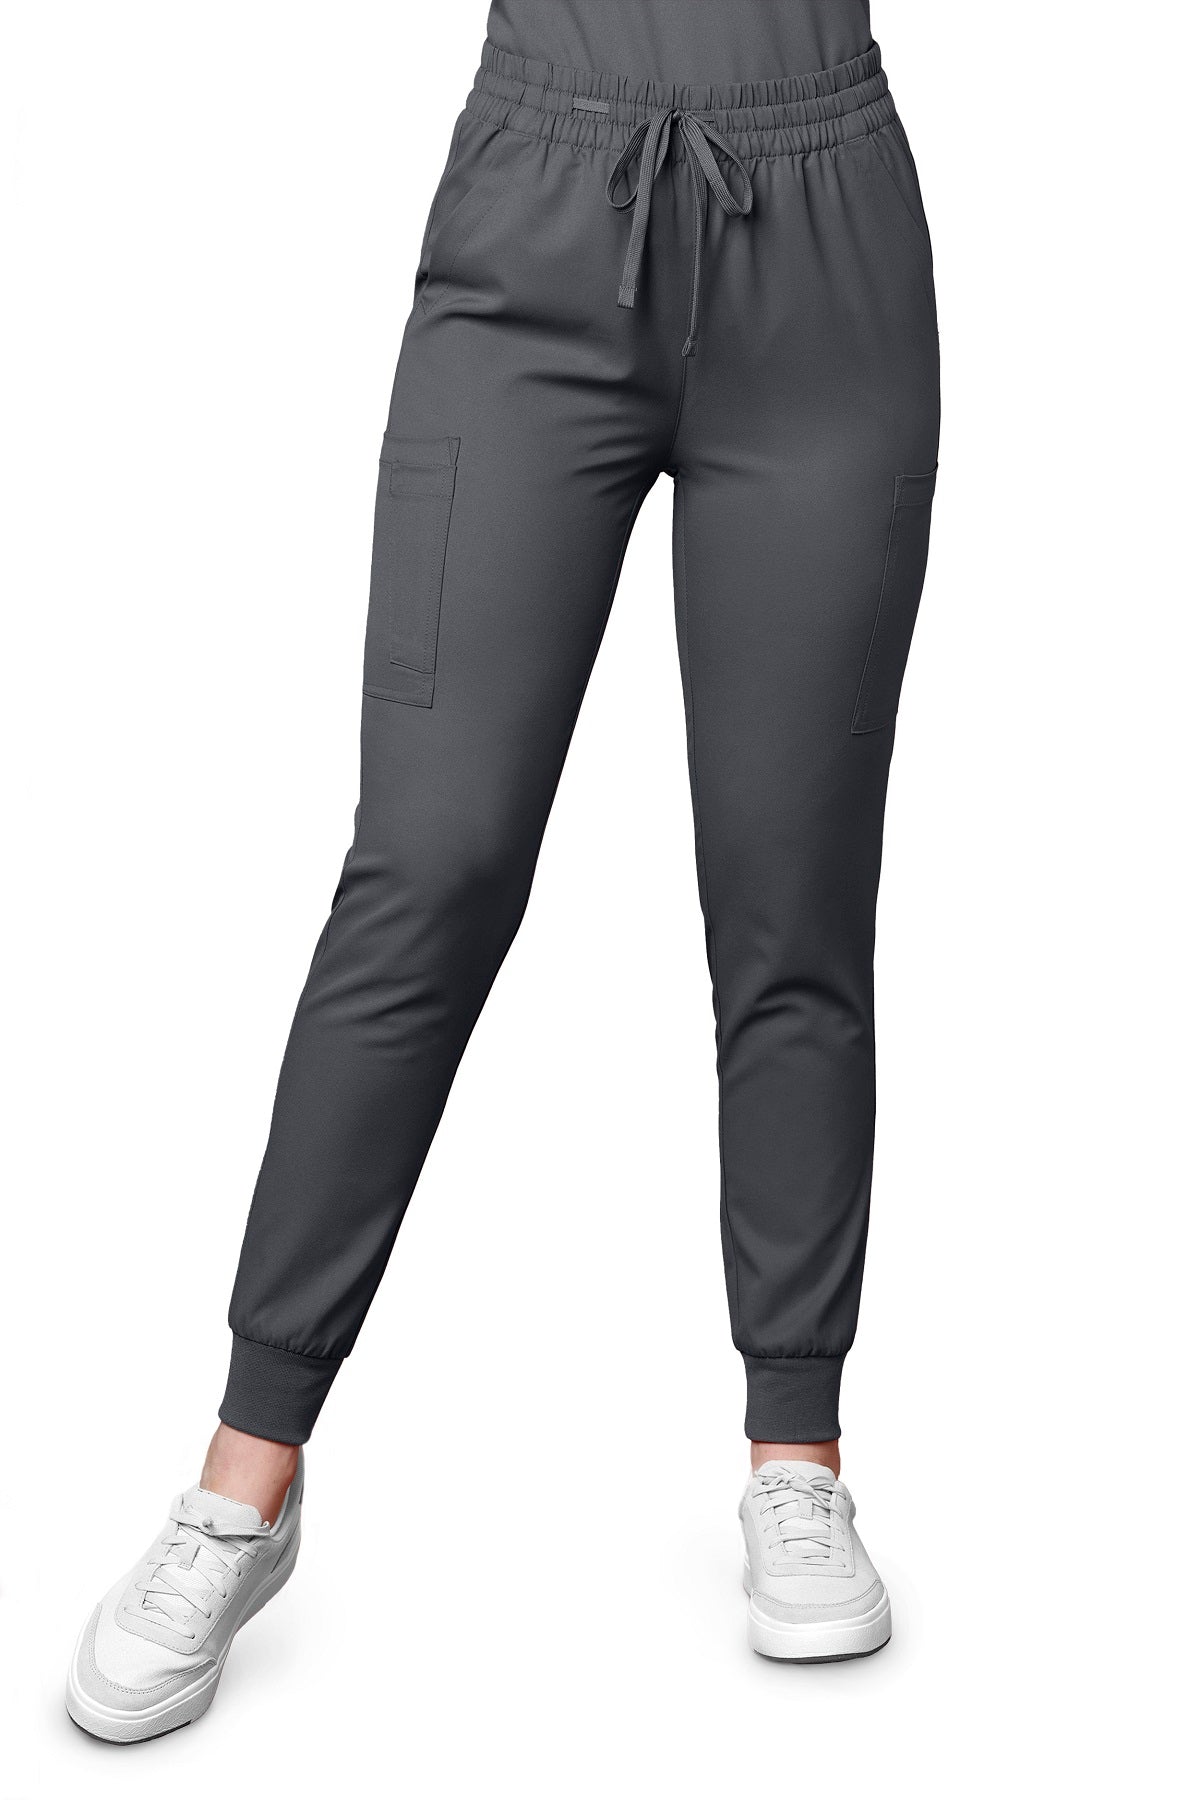 WonderWink Scrub Pants Thrive Jogger regular length in pewter at Parker's Clothing and Shoes.